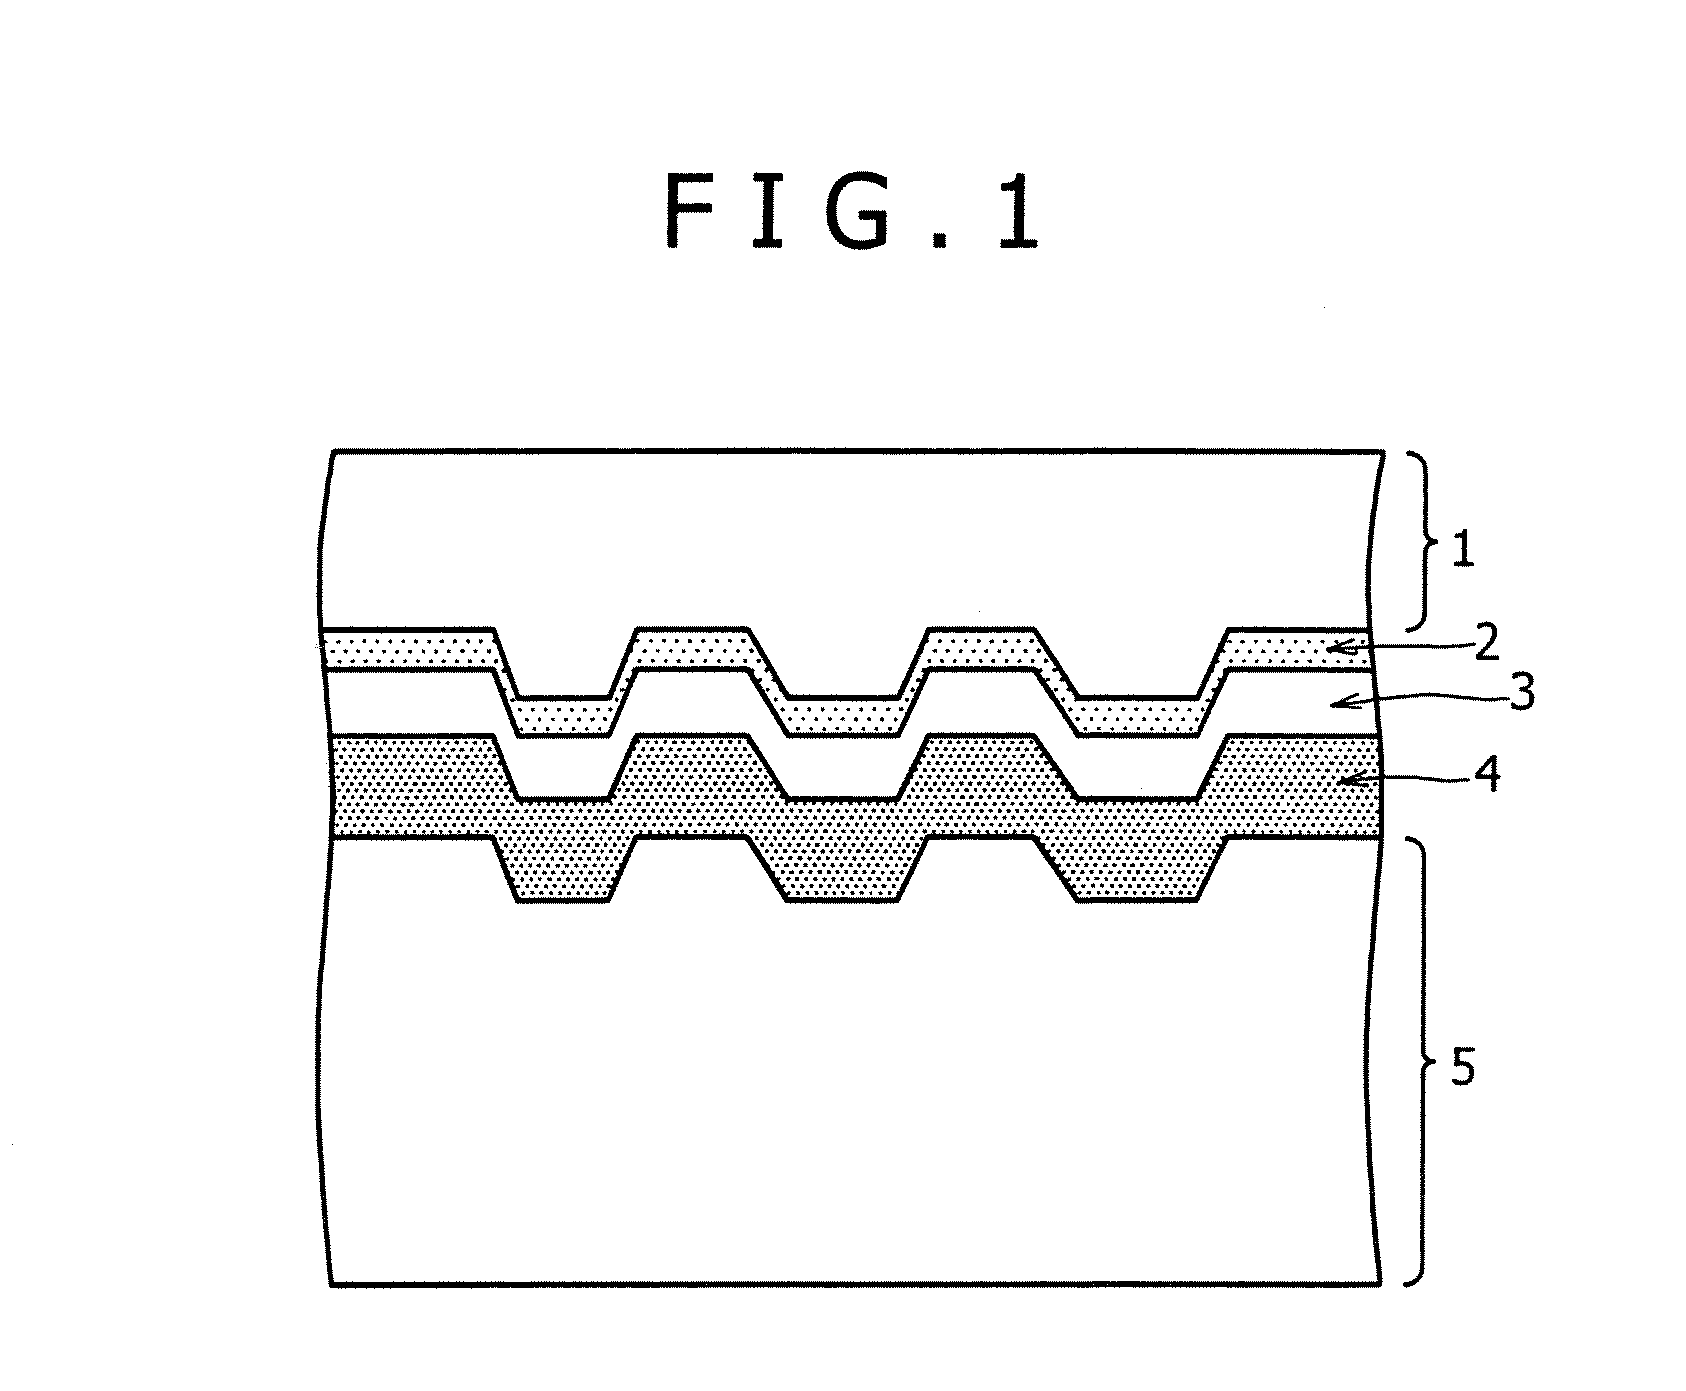 Silver alloy reflective films for optical information recording media, silver alloy sputtering targets therefor, and optical information recording media